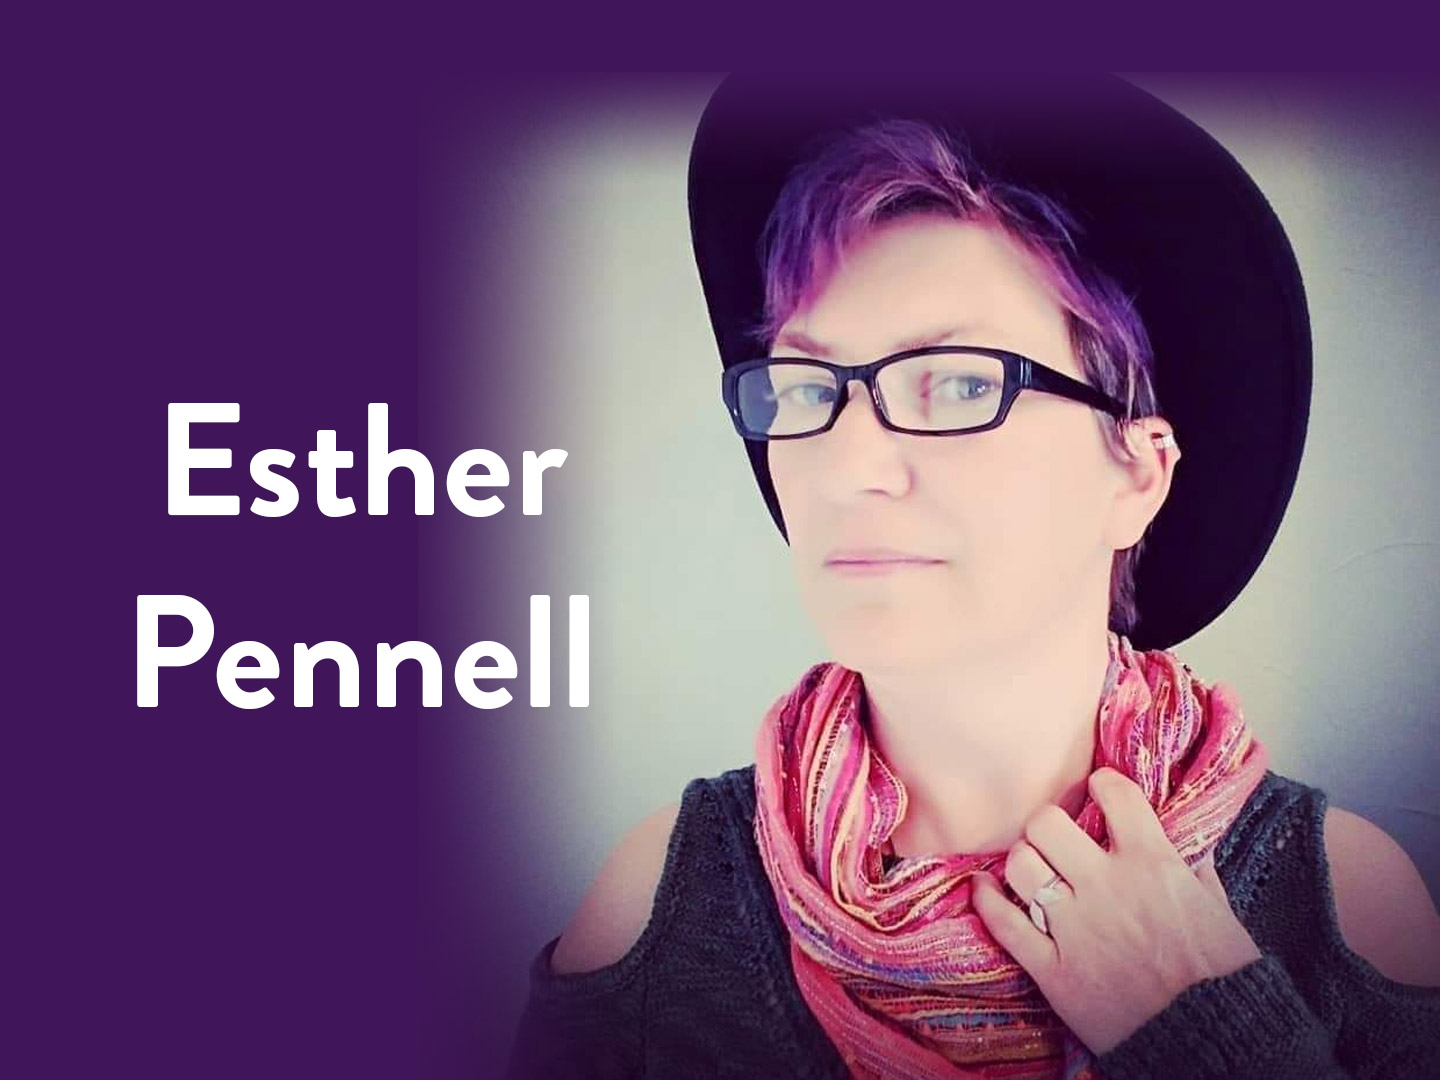 Esther Pennell · sharedbenefit Concert